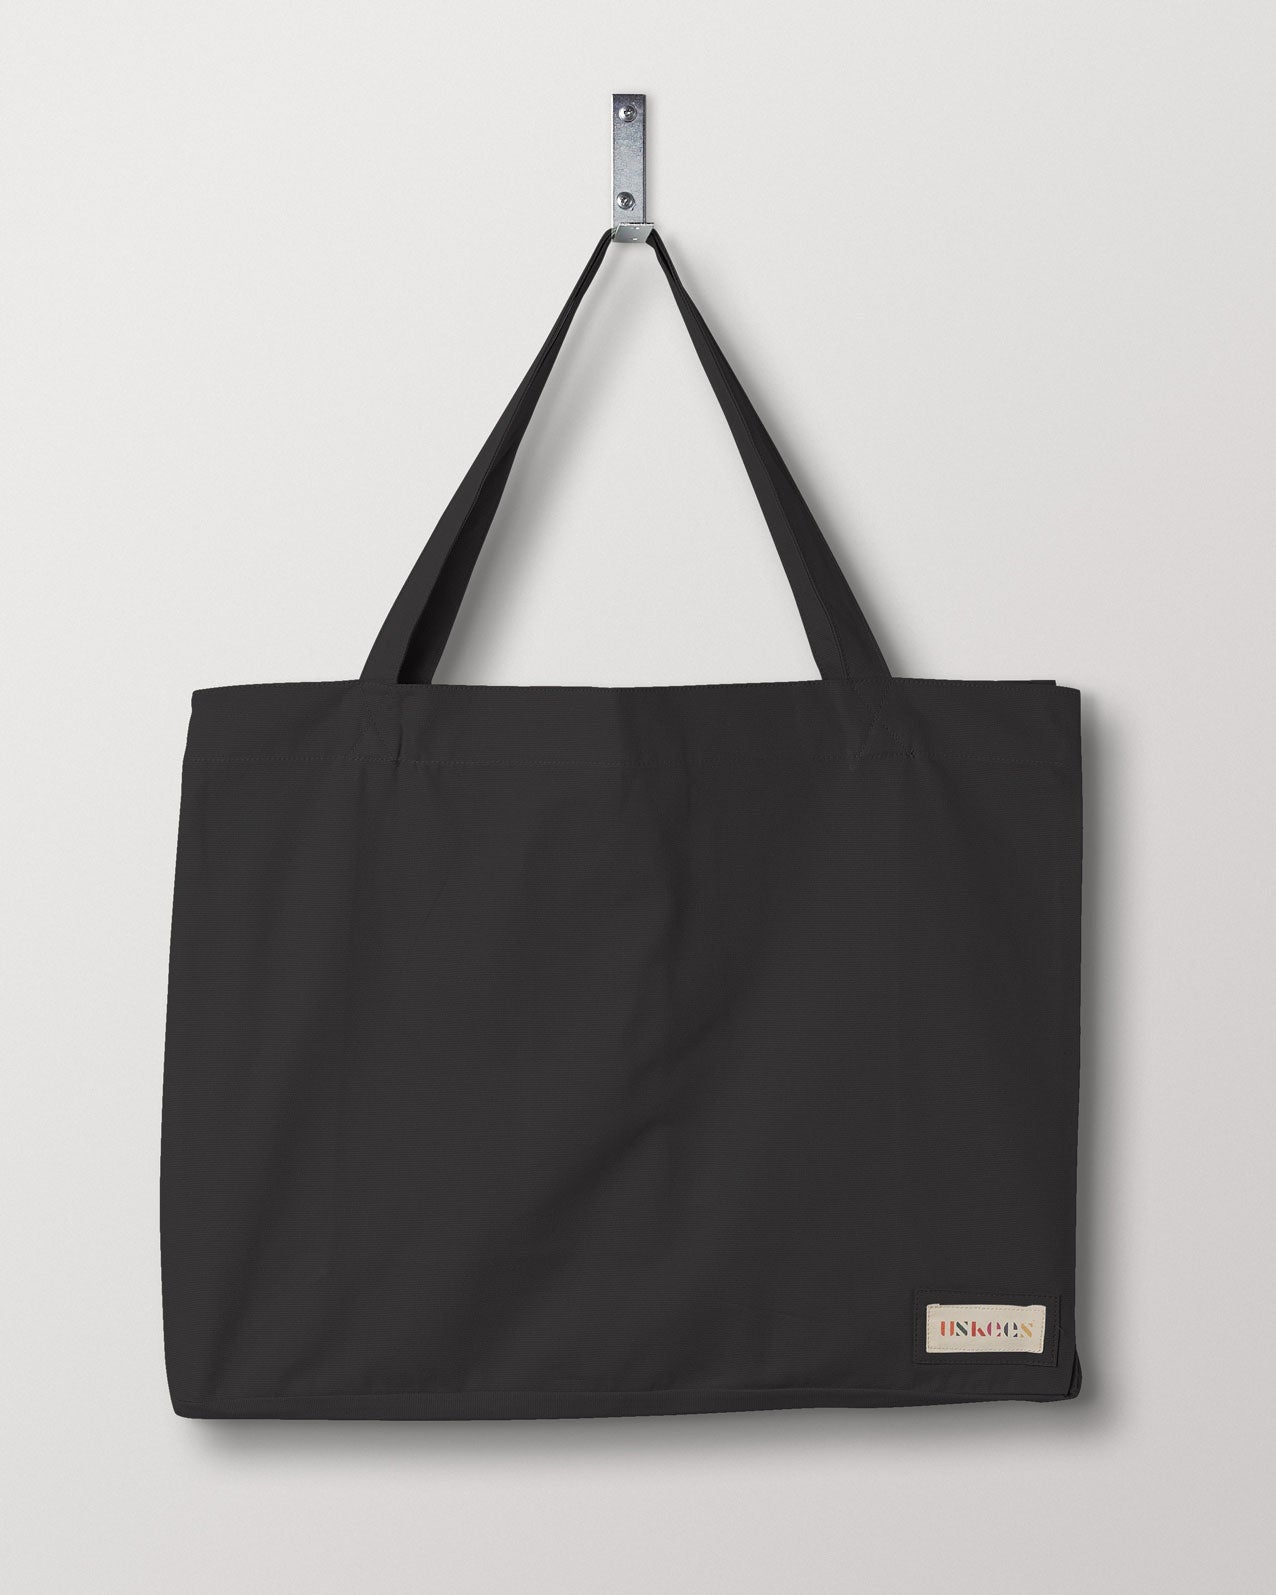 Full front hanging shot of Uskees #4001 large charcoal tote bag, showing double handles and Uskees woven logo.